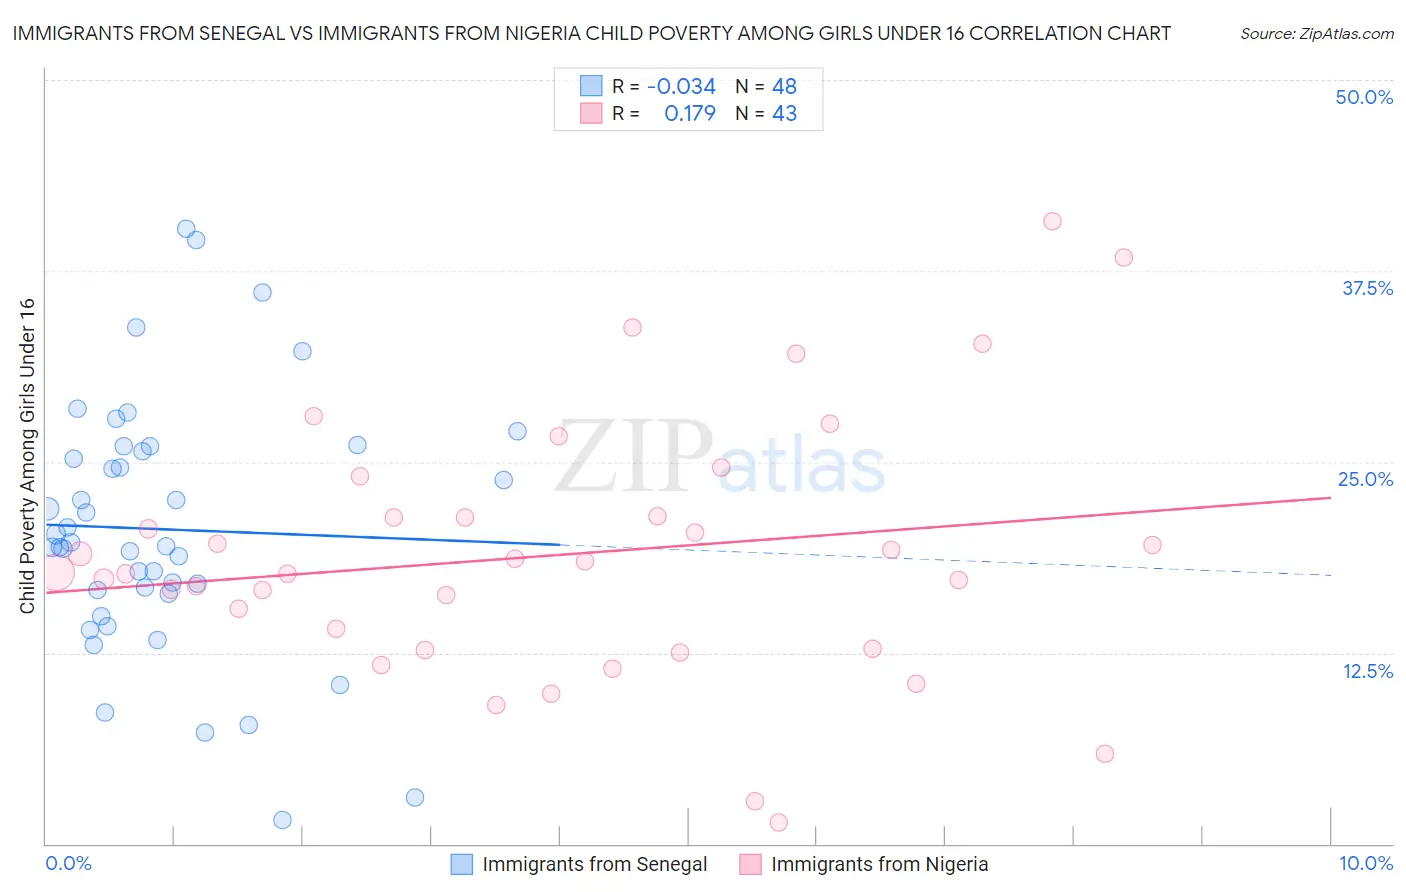 Immigrants from Senegal vs Immigrants from Nigeria Child Poverty Among Girls Under 16